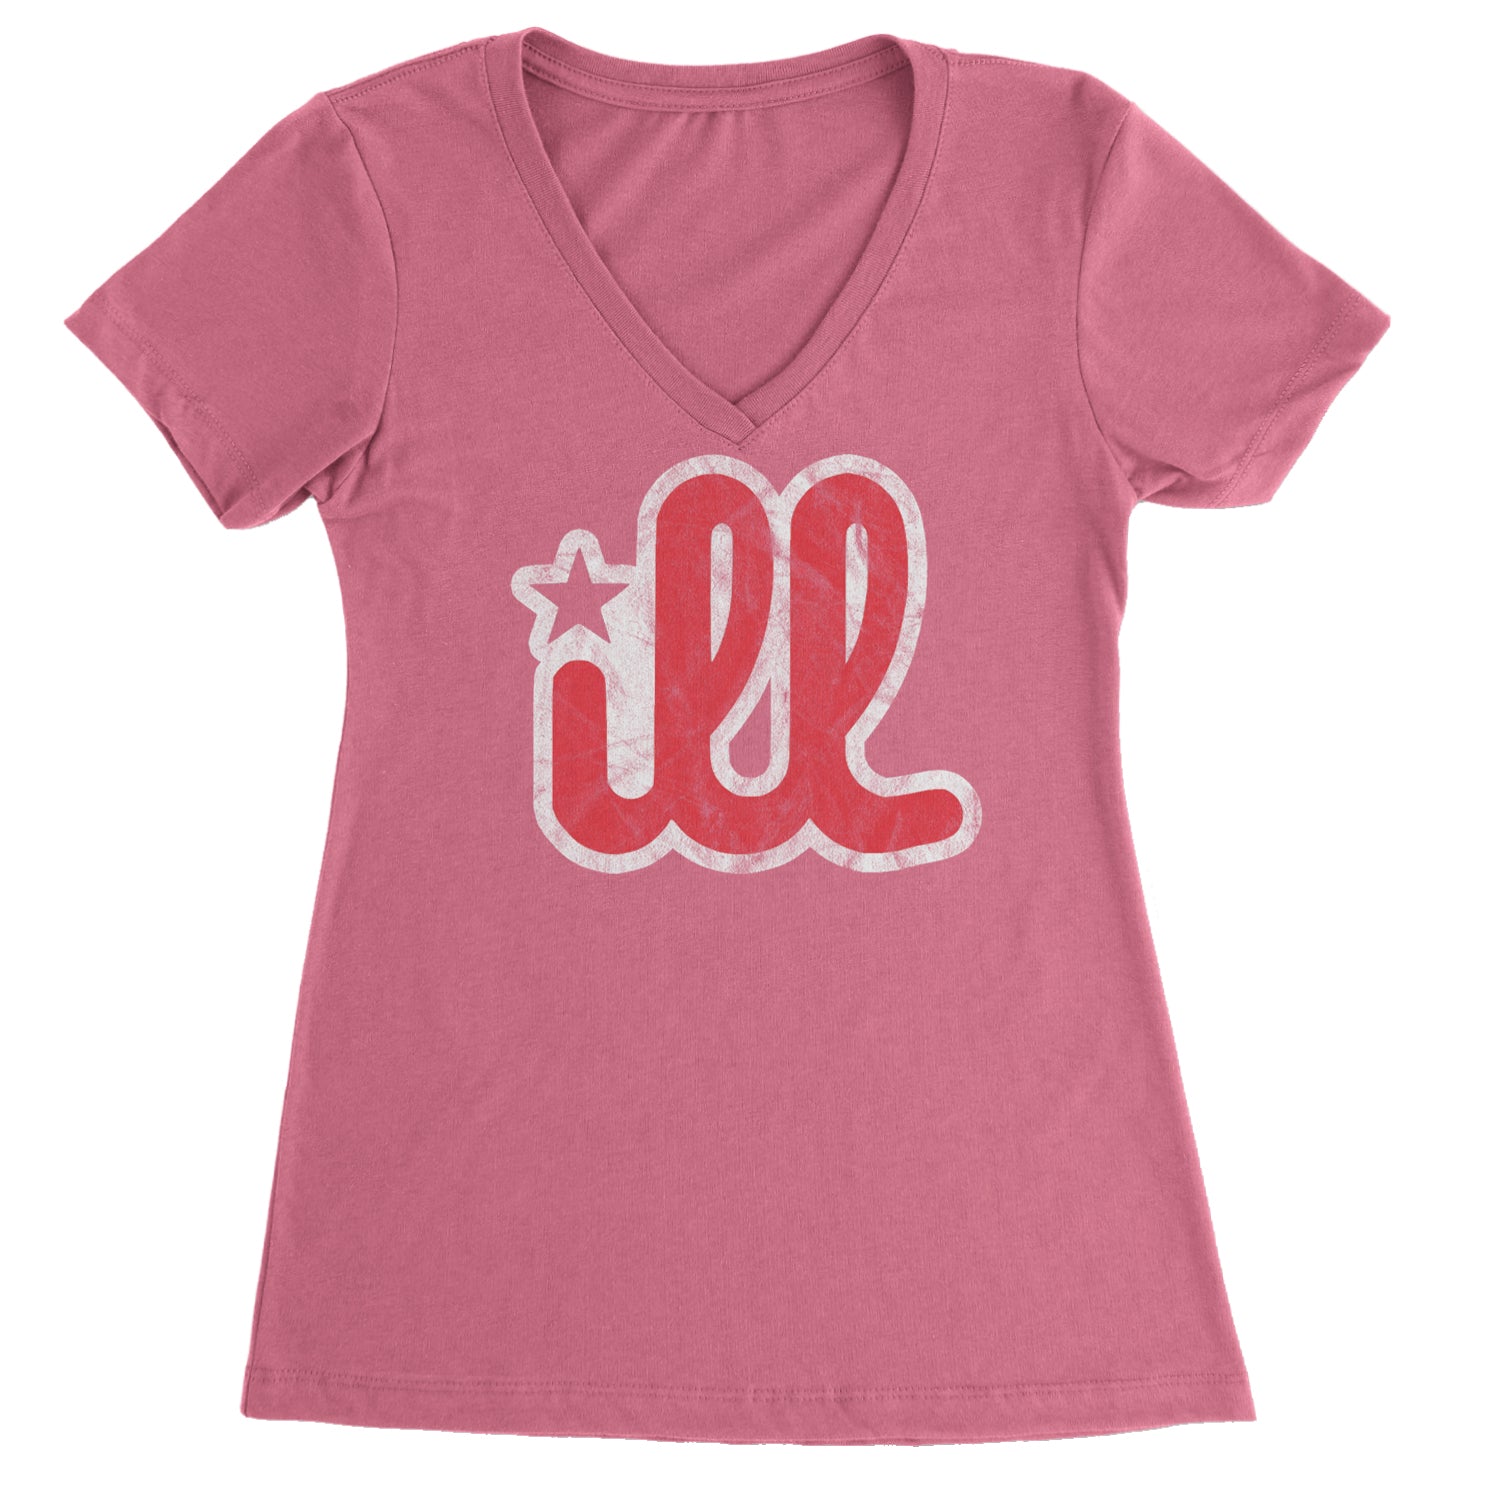 ILL Vintage It's A Philadelphia Philly Thing Ladies V-Neck T-shirt Hot Pink